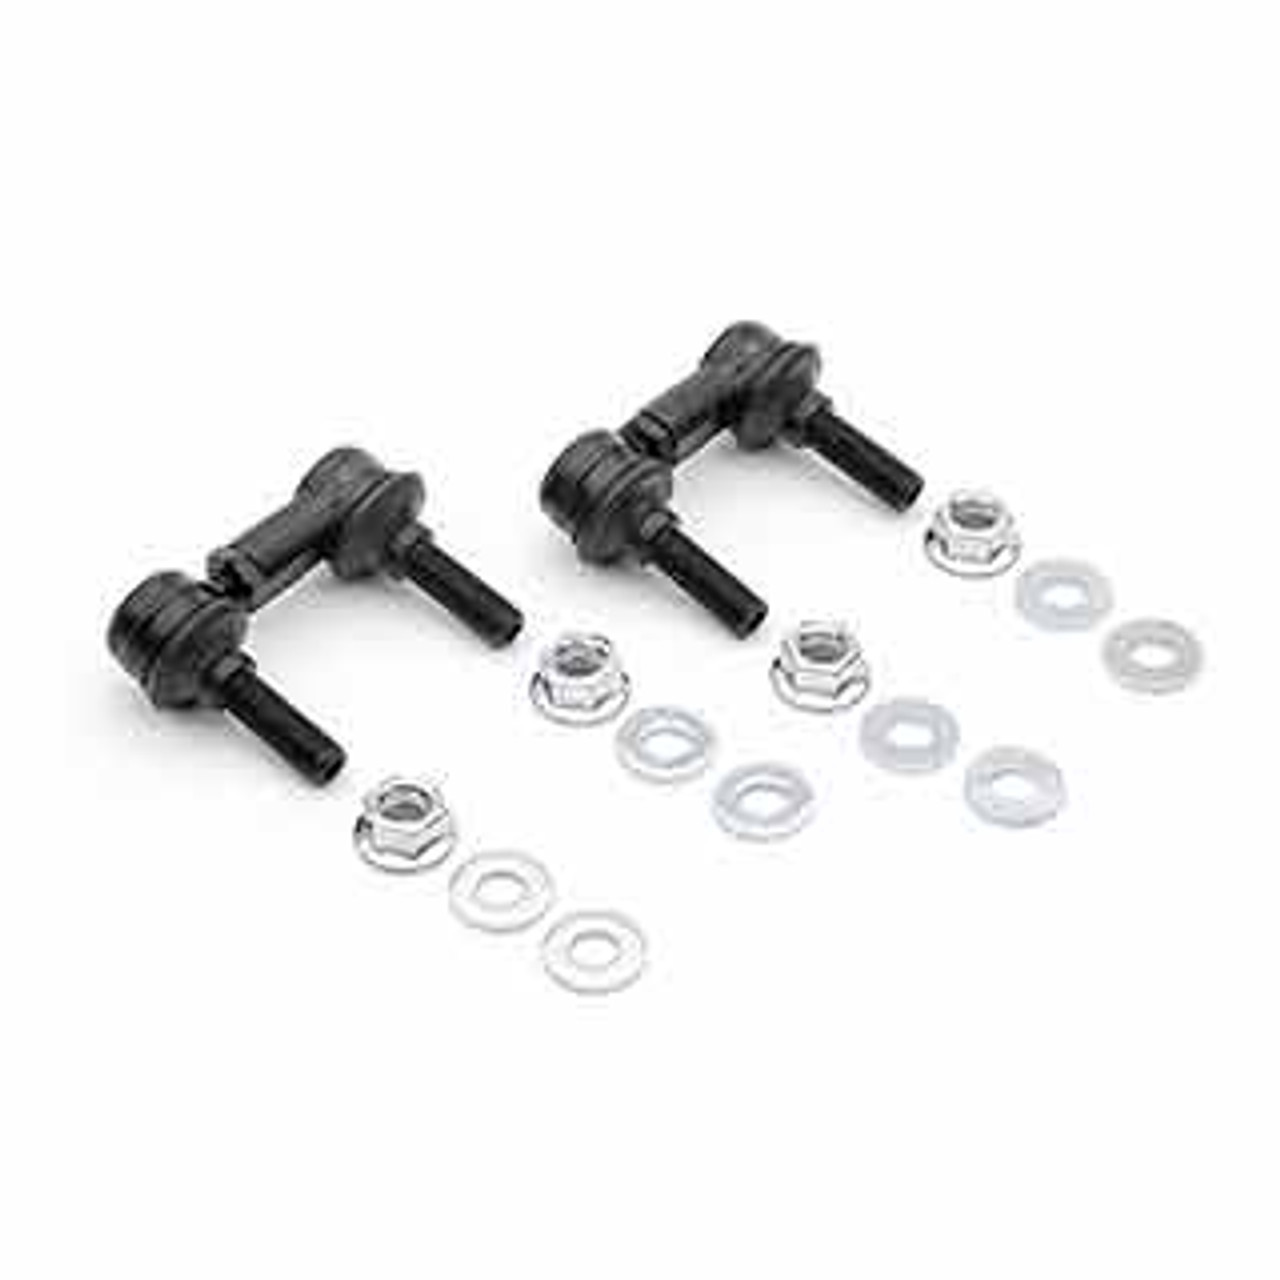 SUBARU COMPETITION READY SUSPENSION PACKAGE - FRONT SWAY BAR LINK KIT - HEAVY DUTY ADJUSTABLE